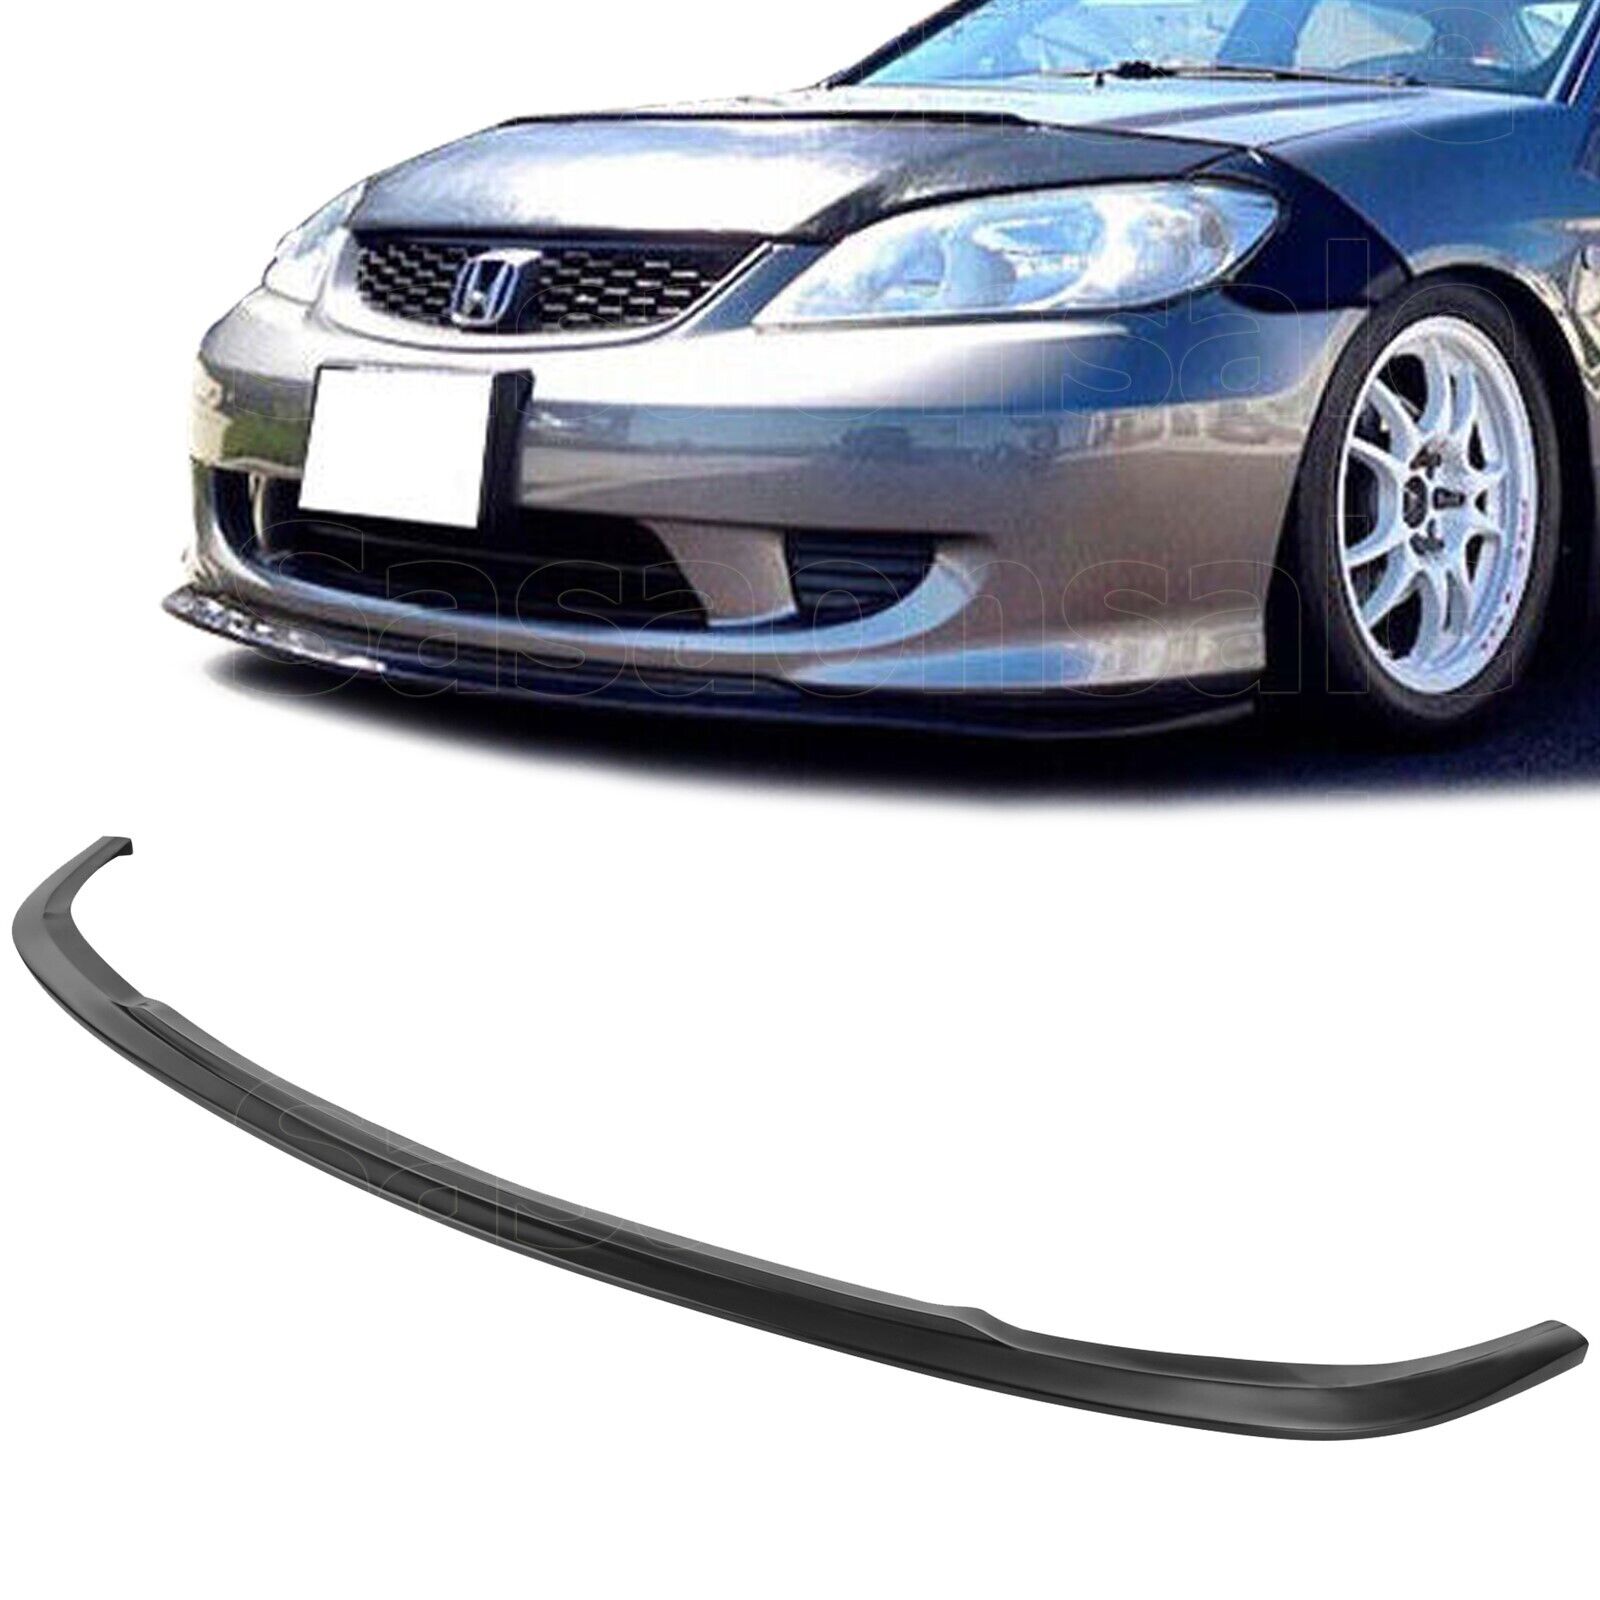 [SASA] Made for 04-05 Honda Civic 2dr 4dr AS Style PU Front Bumper Lip Splitter